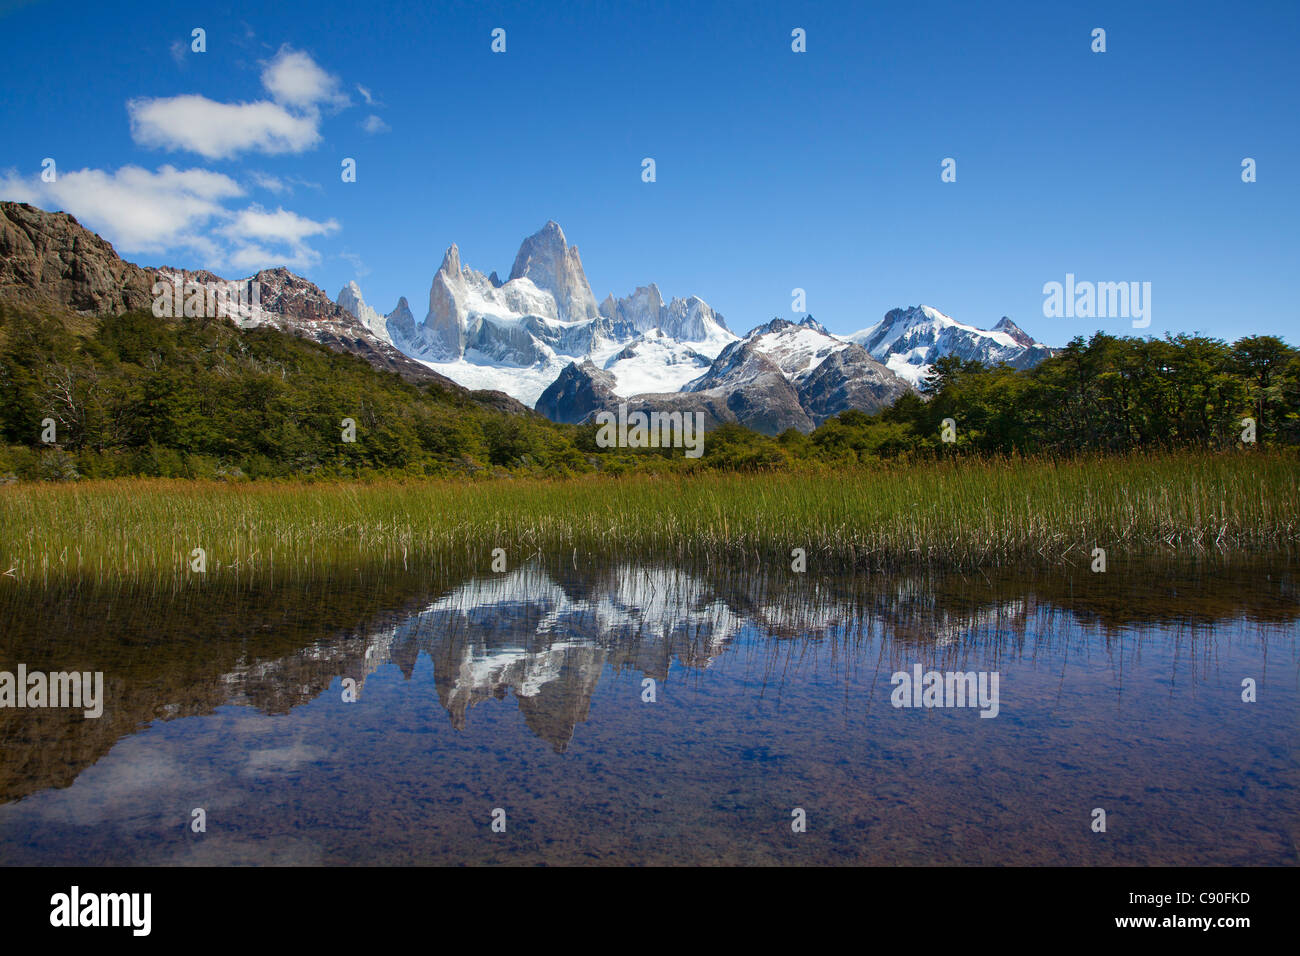 Mt. Fitz Roy reflecting in a little pond, Los Glaciares National Park, near El Chalten, Patagonia, Argentina Stock Photo